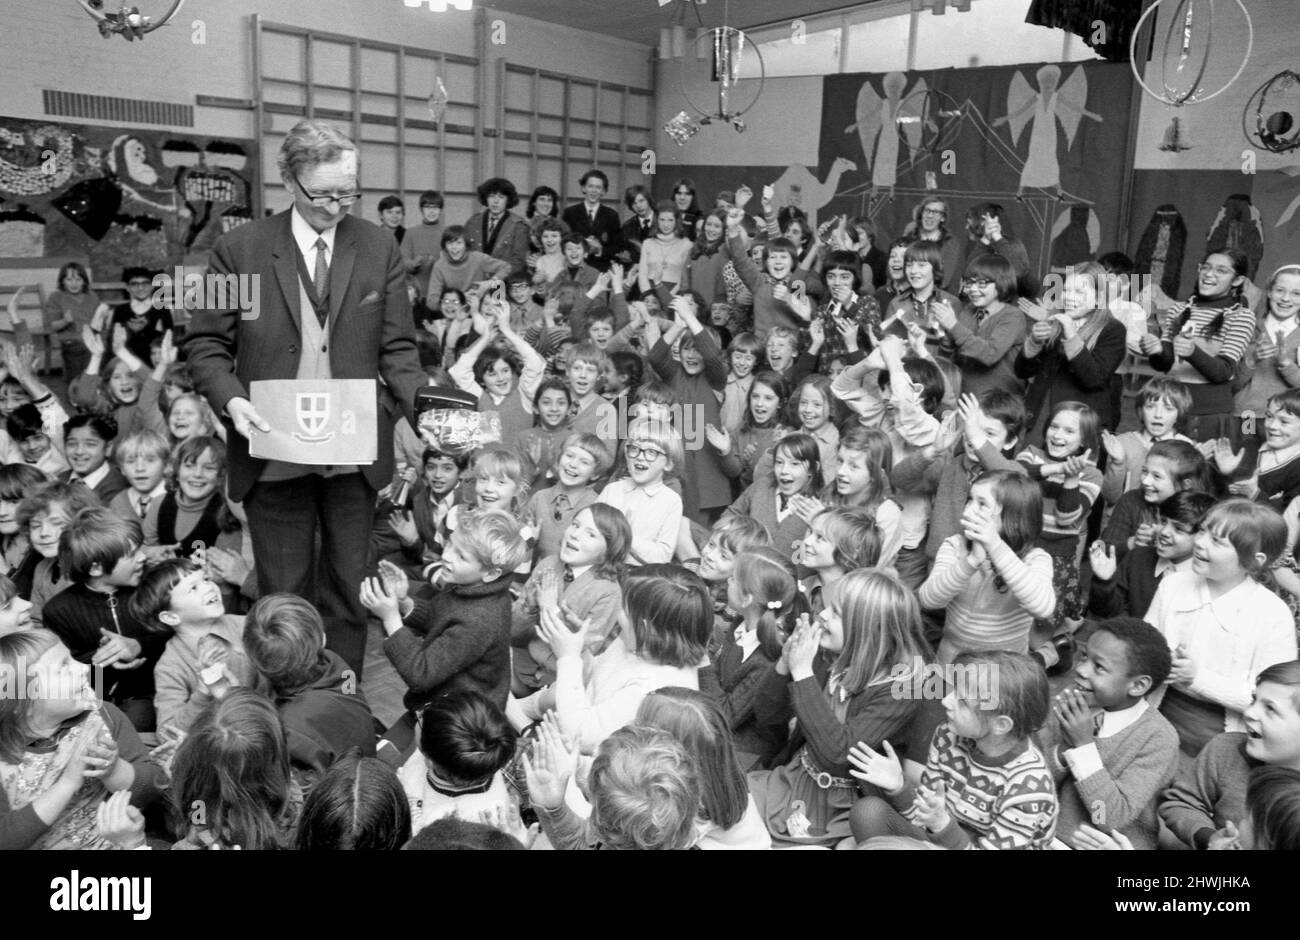 The children of St. Paul's Junior School in Upper Holly Walk, Leamington Spa, give a cheery send-off to their headmaster, Mr. T. T. Rutherford, who is leaving the school after 23 years' service.19th December 1973 Stock Photo